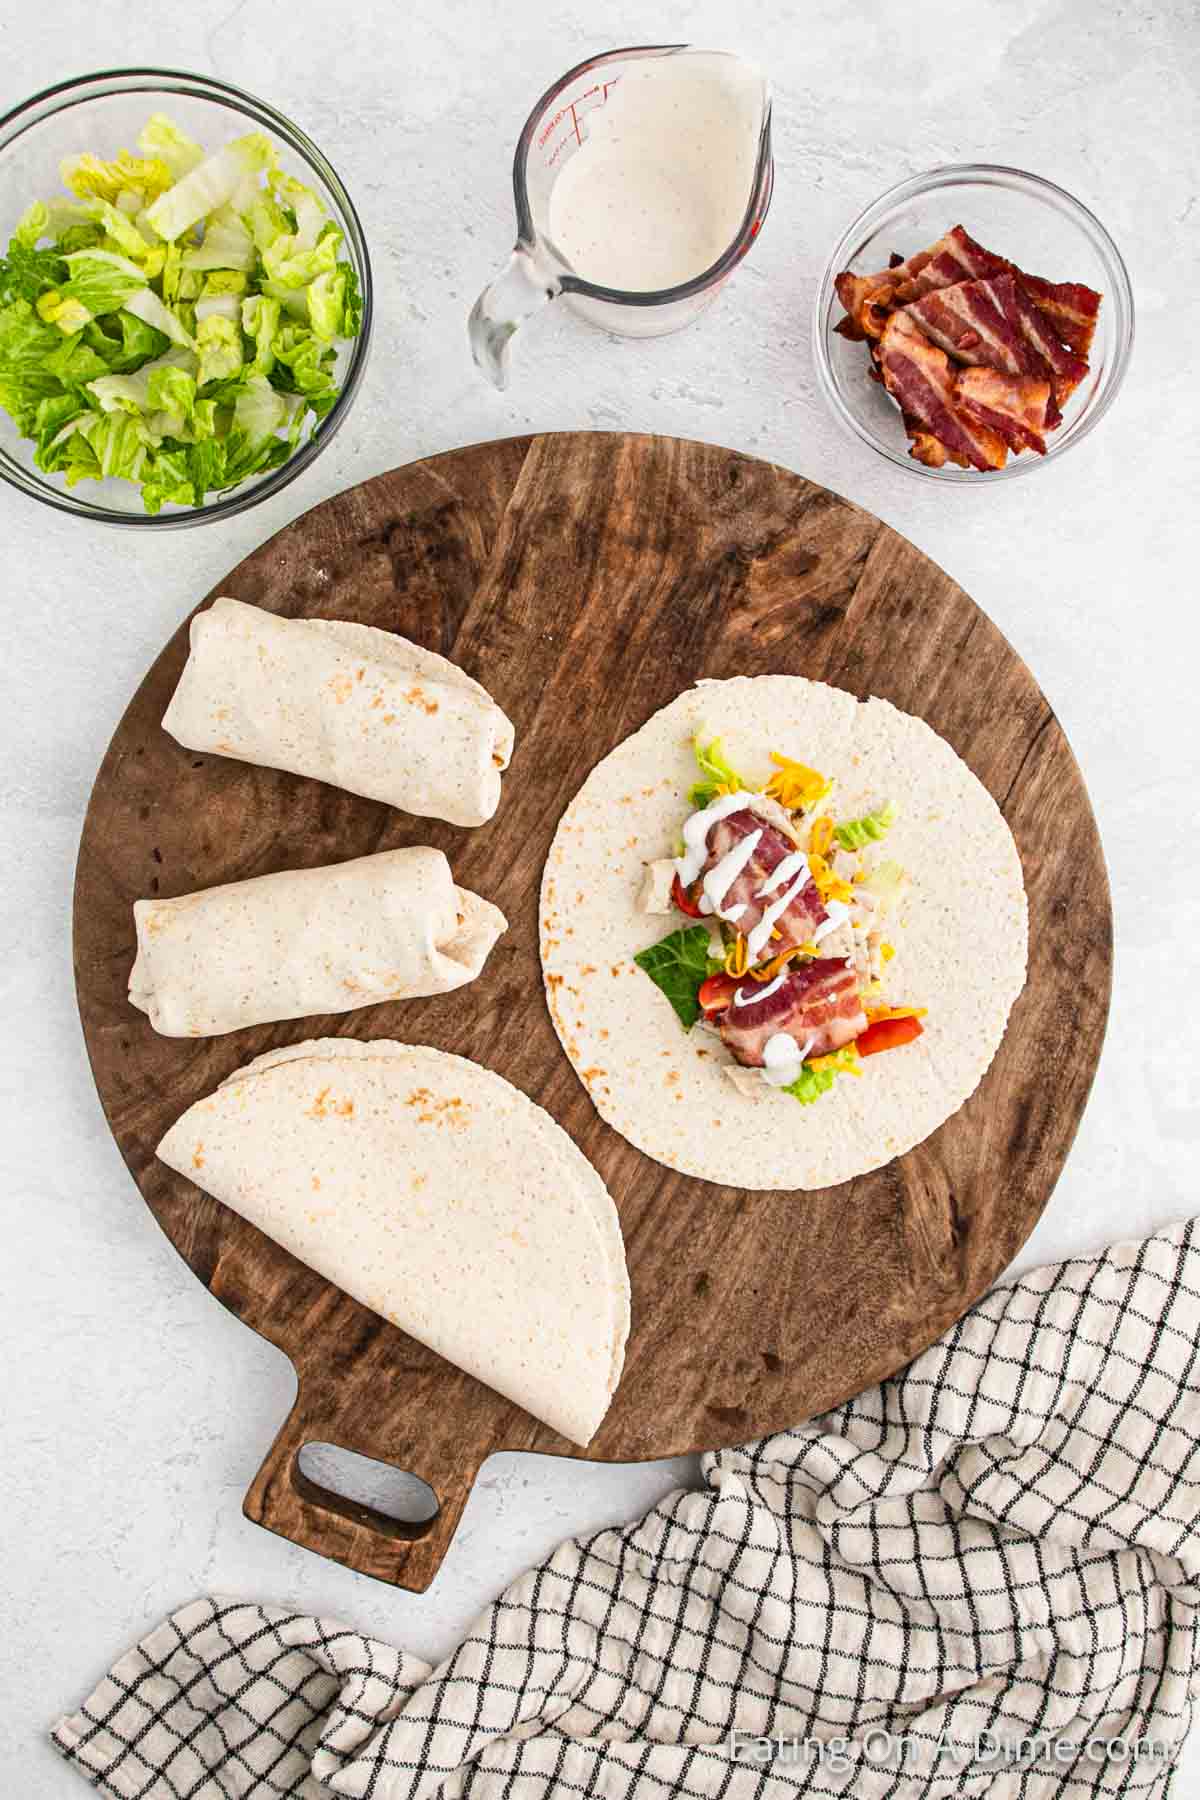 Bowl of shredded lettuce, ranch bacon, and wraps on a cutting board